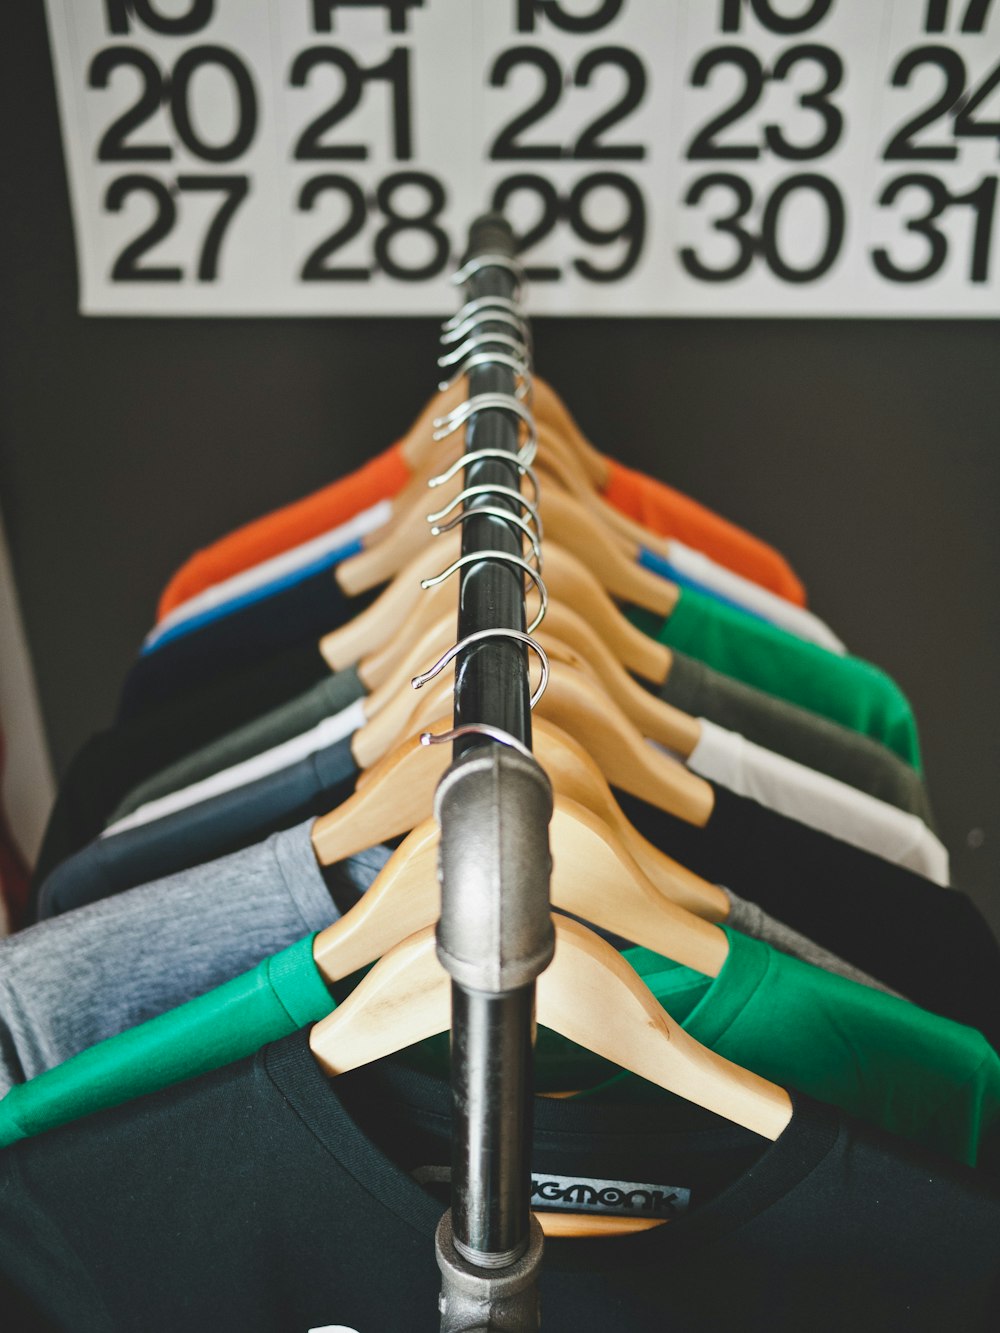 assorted-color hanged shirts with hangers